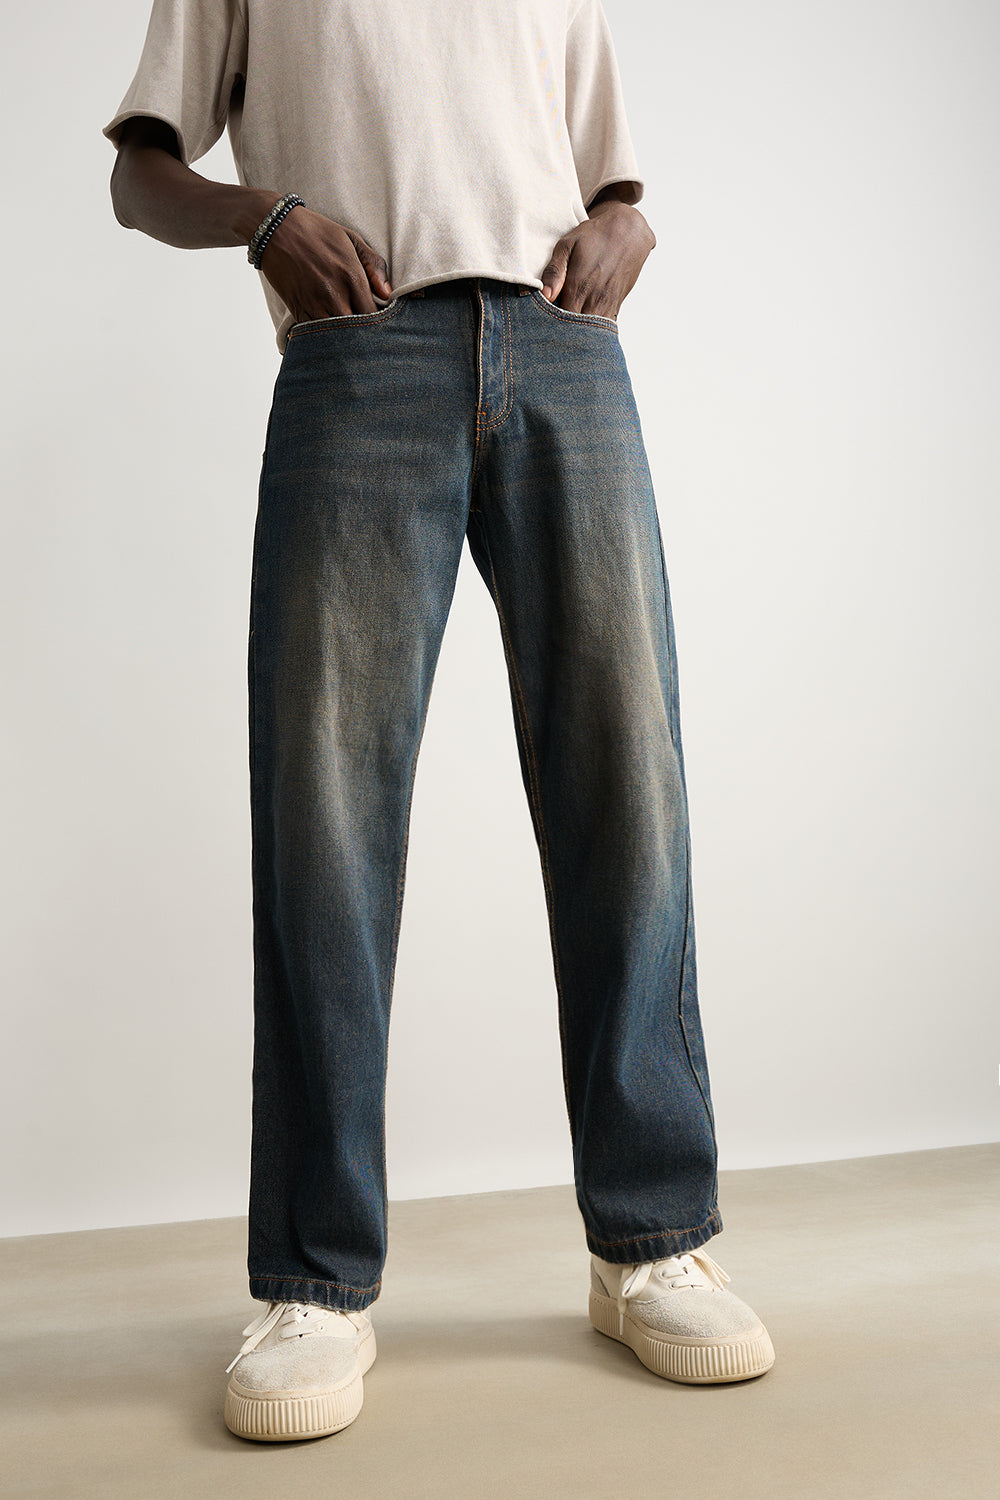 WIDE FIT SHADED MEN'S JEANS